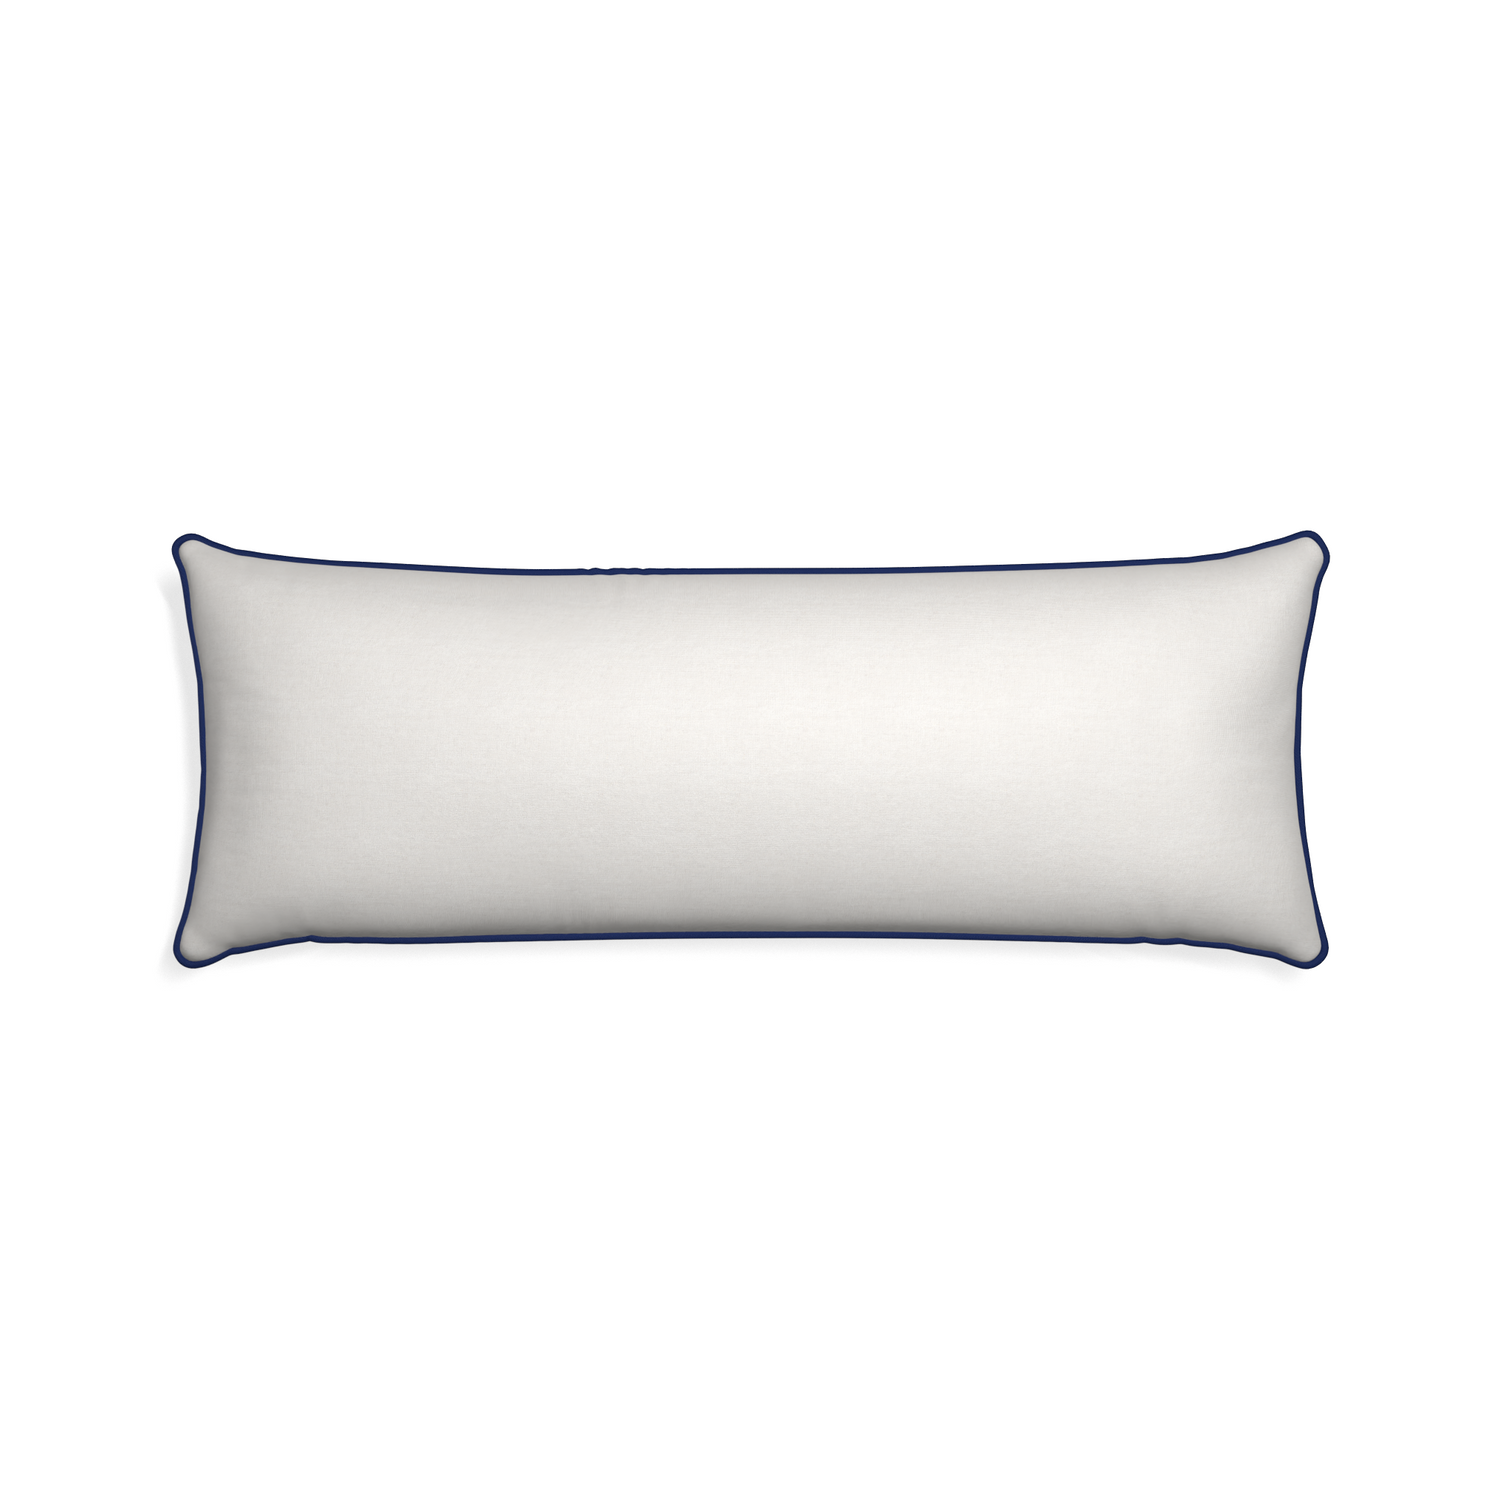 Xl-lumbar flour custom pillow with midnight piping on white background